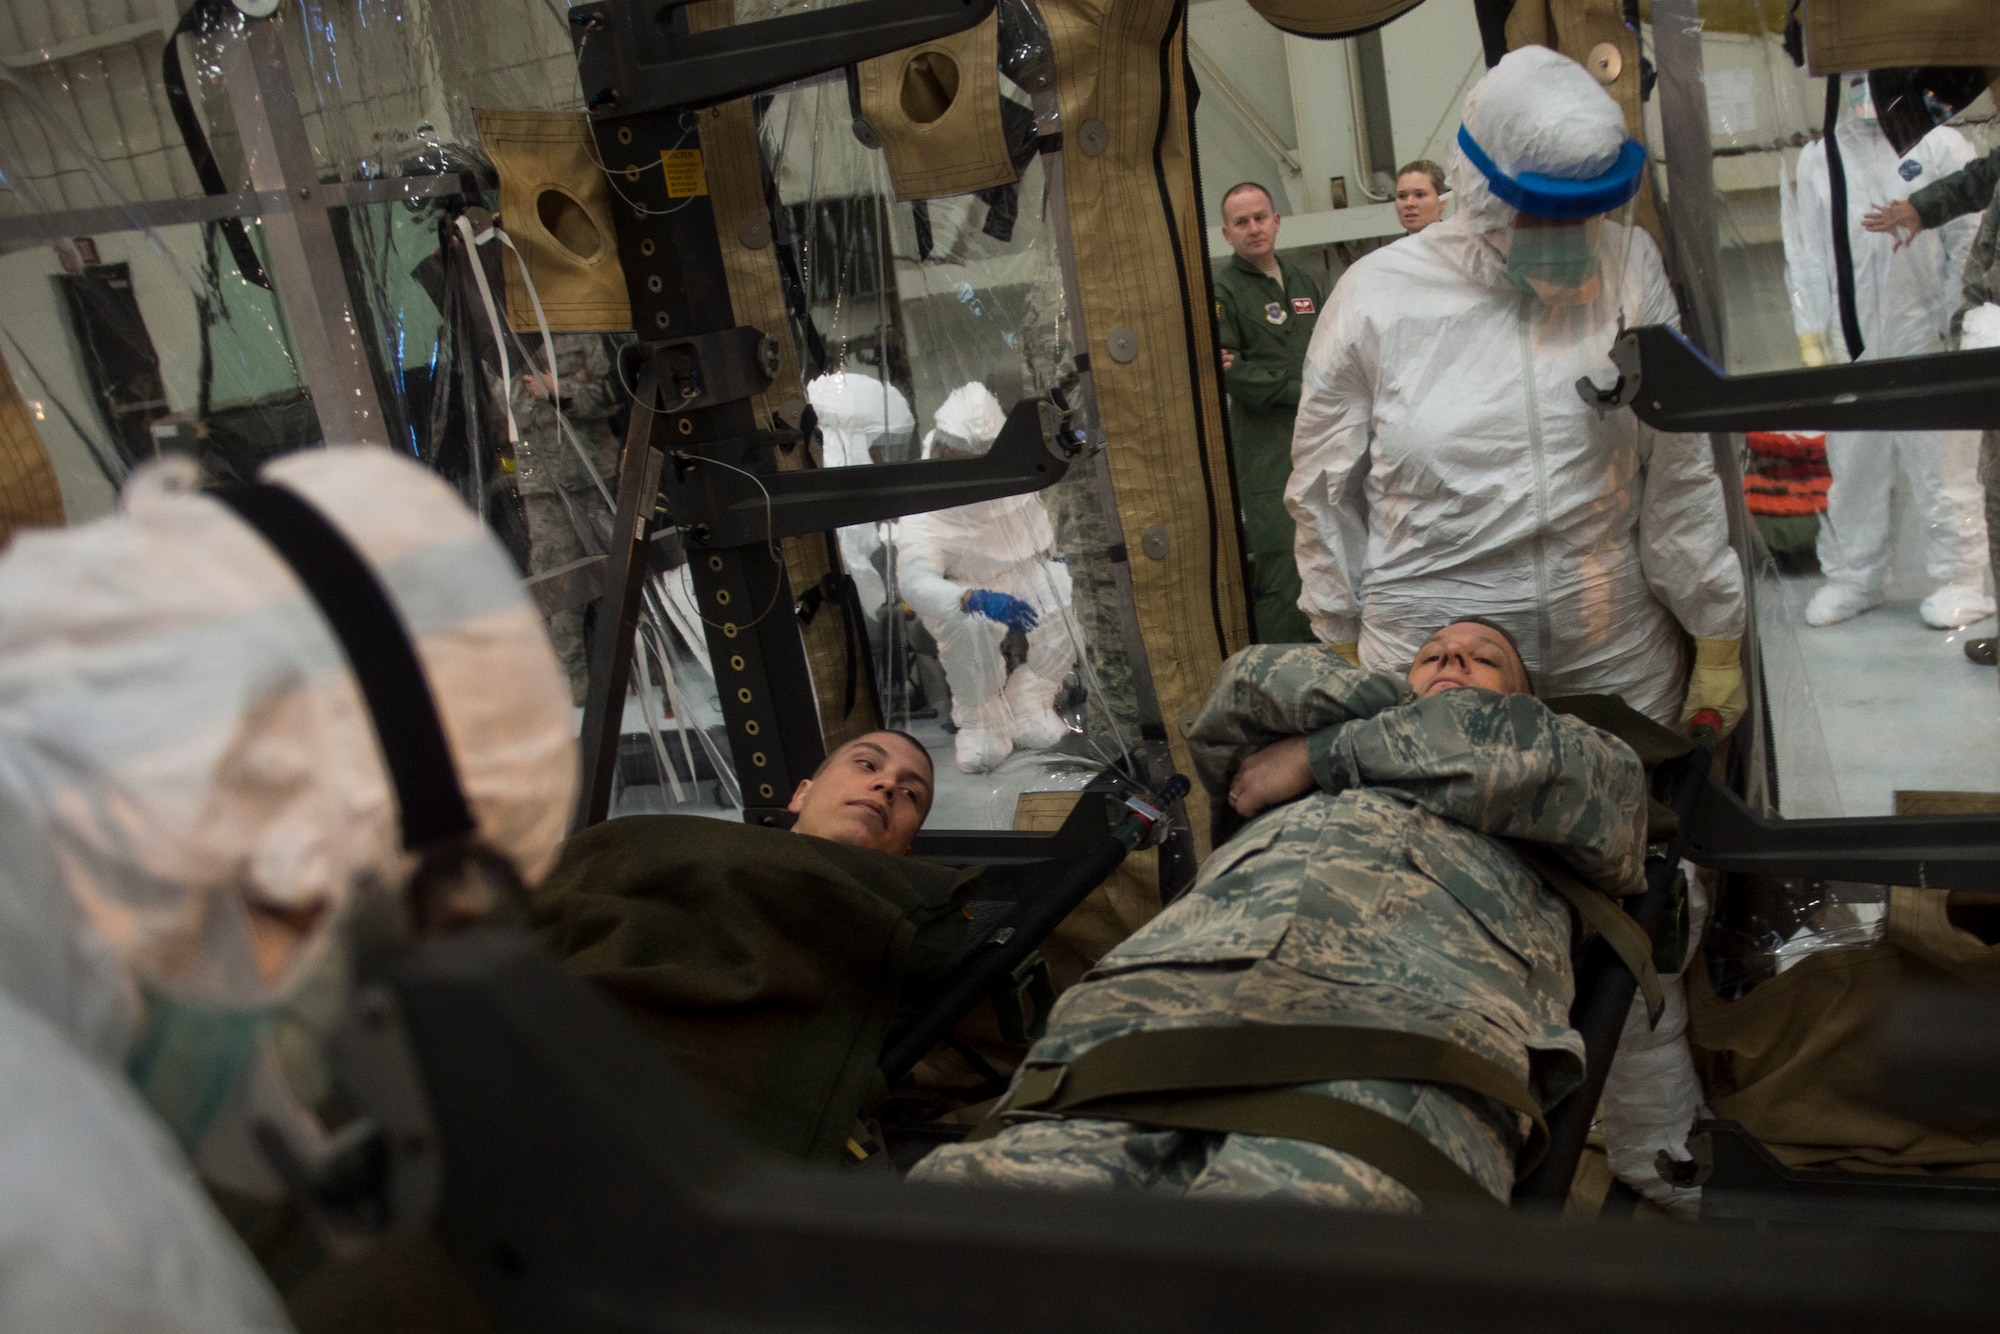 Airmen from Joint Base Charleston and the Air Force Operational Test and Evaluation Center build, test and evaluate the Transport Isolation System (TIS) at JB Charleston, Dec. 10, 2014. The TIS is a self-contained module system that can be used with either two or three sections, depending on aircraft space. It will be used to safely transport patients with an infectious disease. (U.S. Air Force photo by Airman 1st Class Taylor Queen/Released)